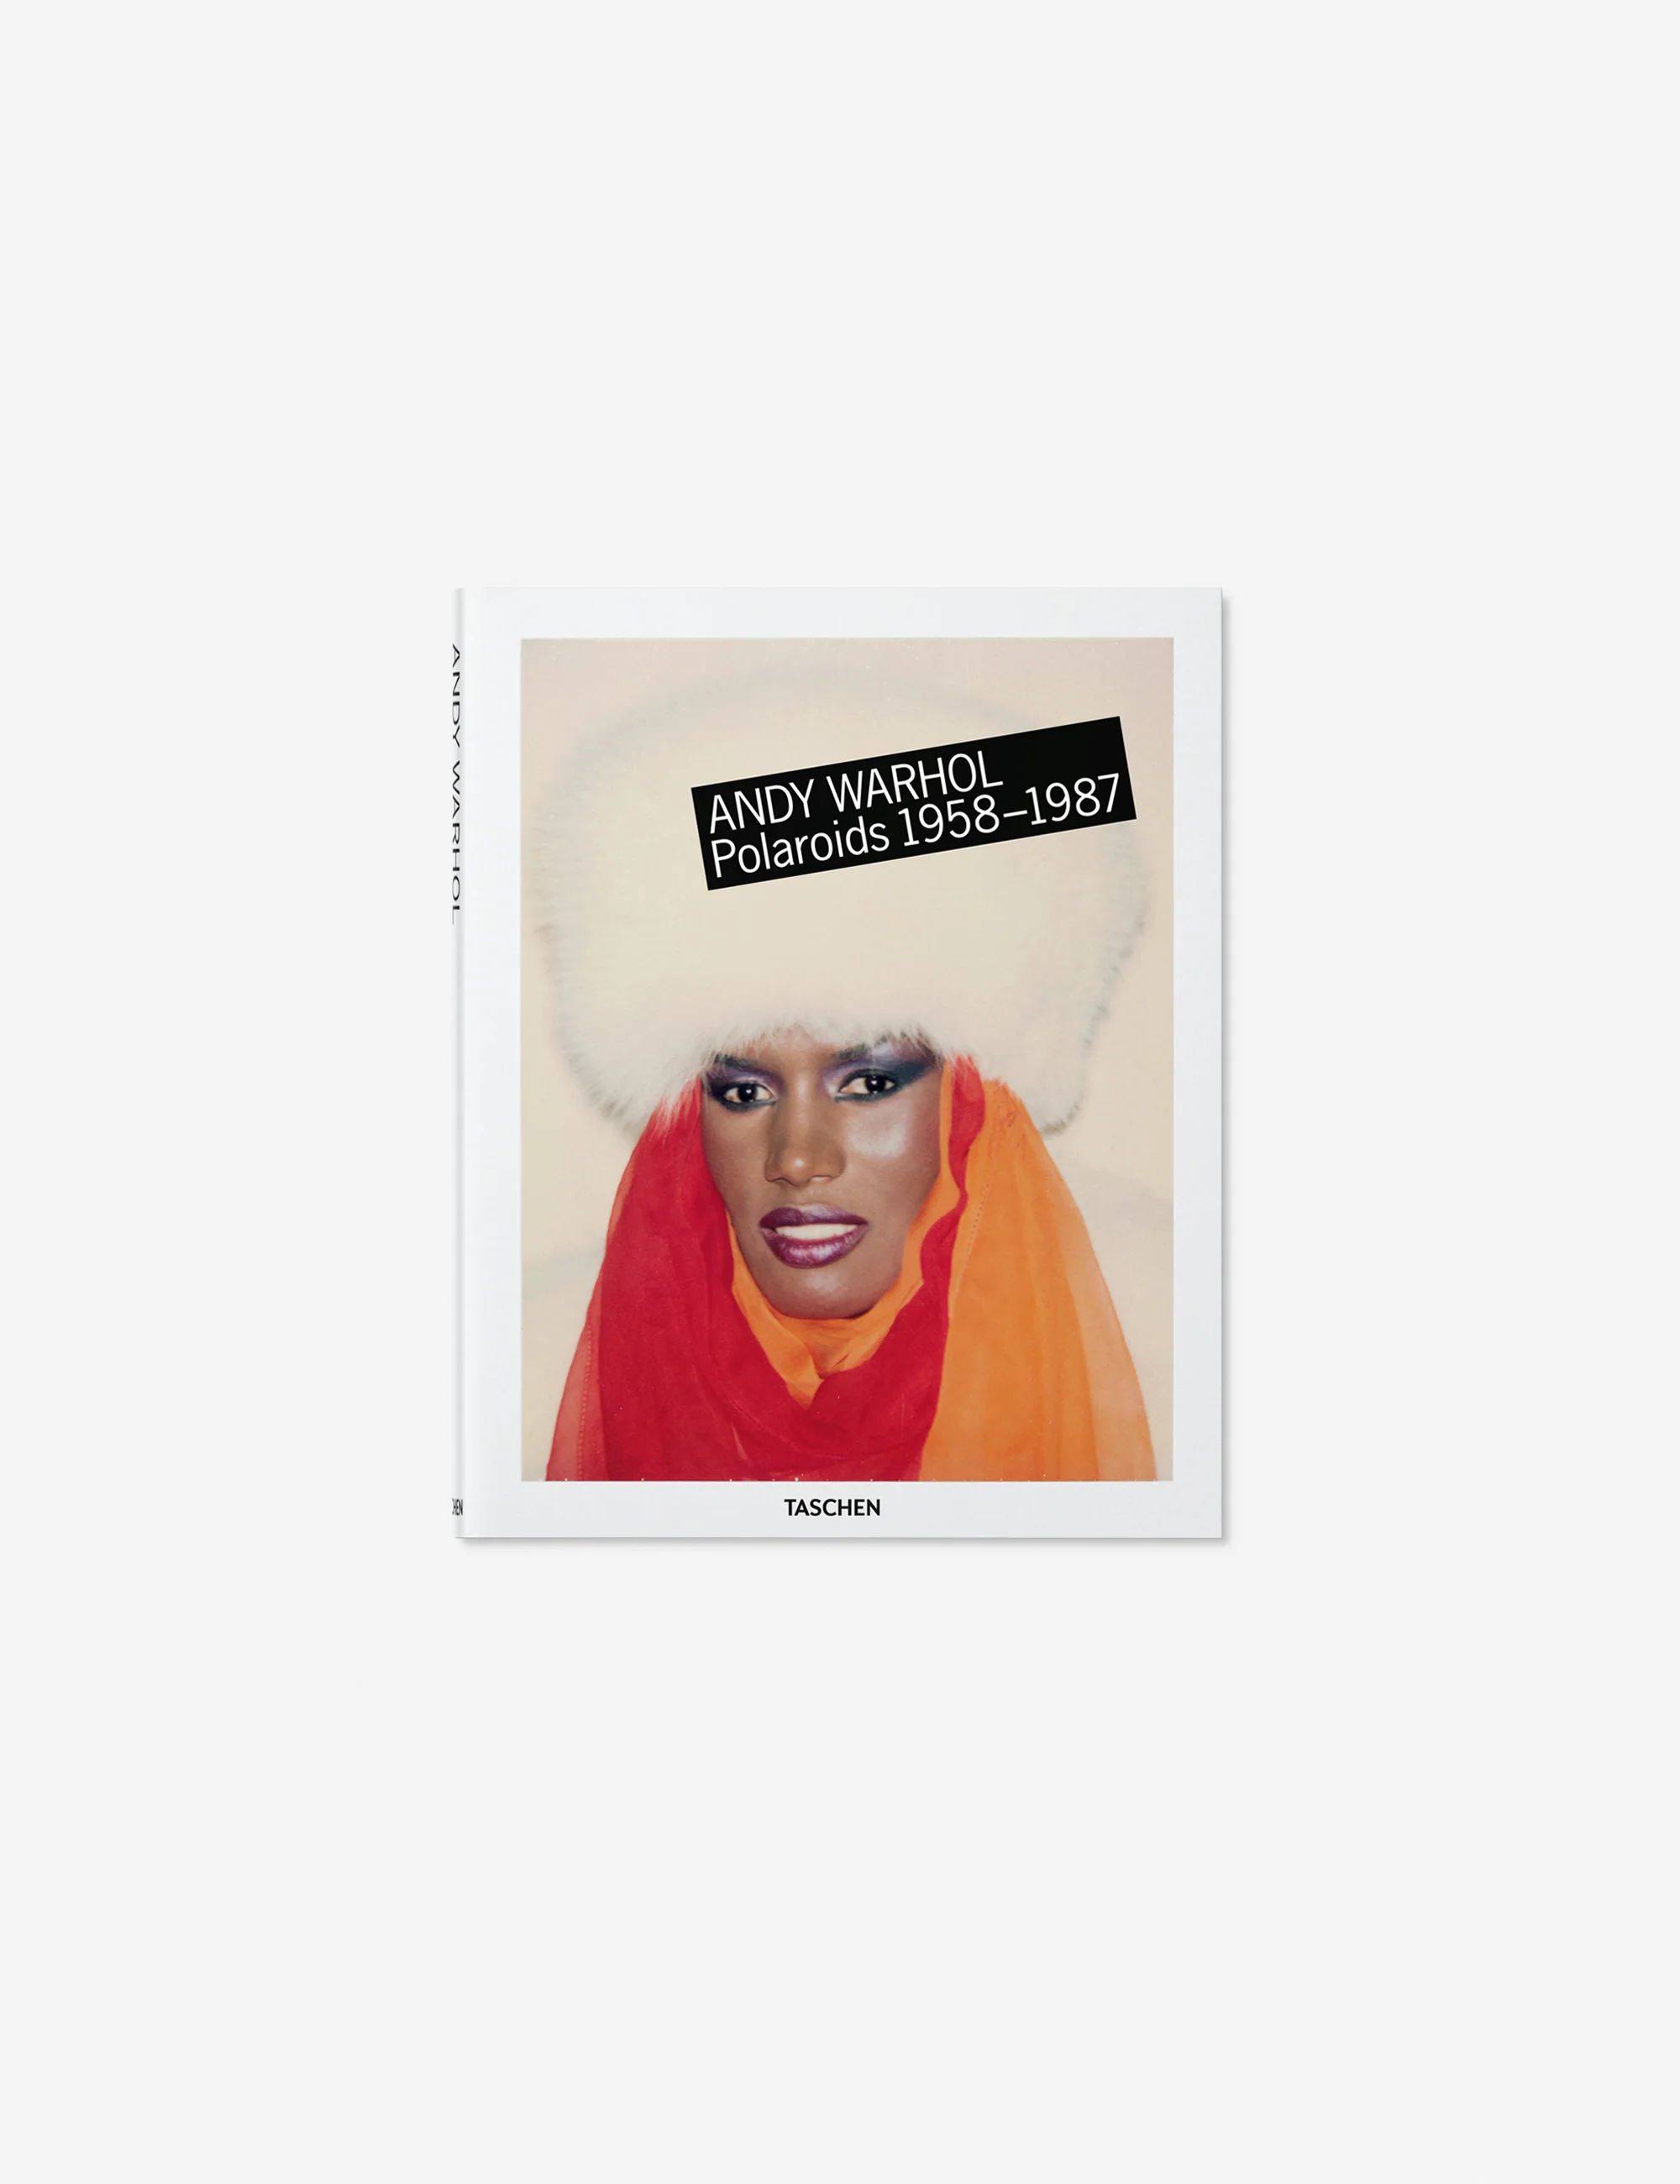 'Andy Warhol: Polaroids 1958-1987' Book by Richard B. Woodward and Reuel Golden | Lulu and Georgia 